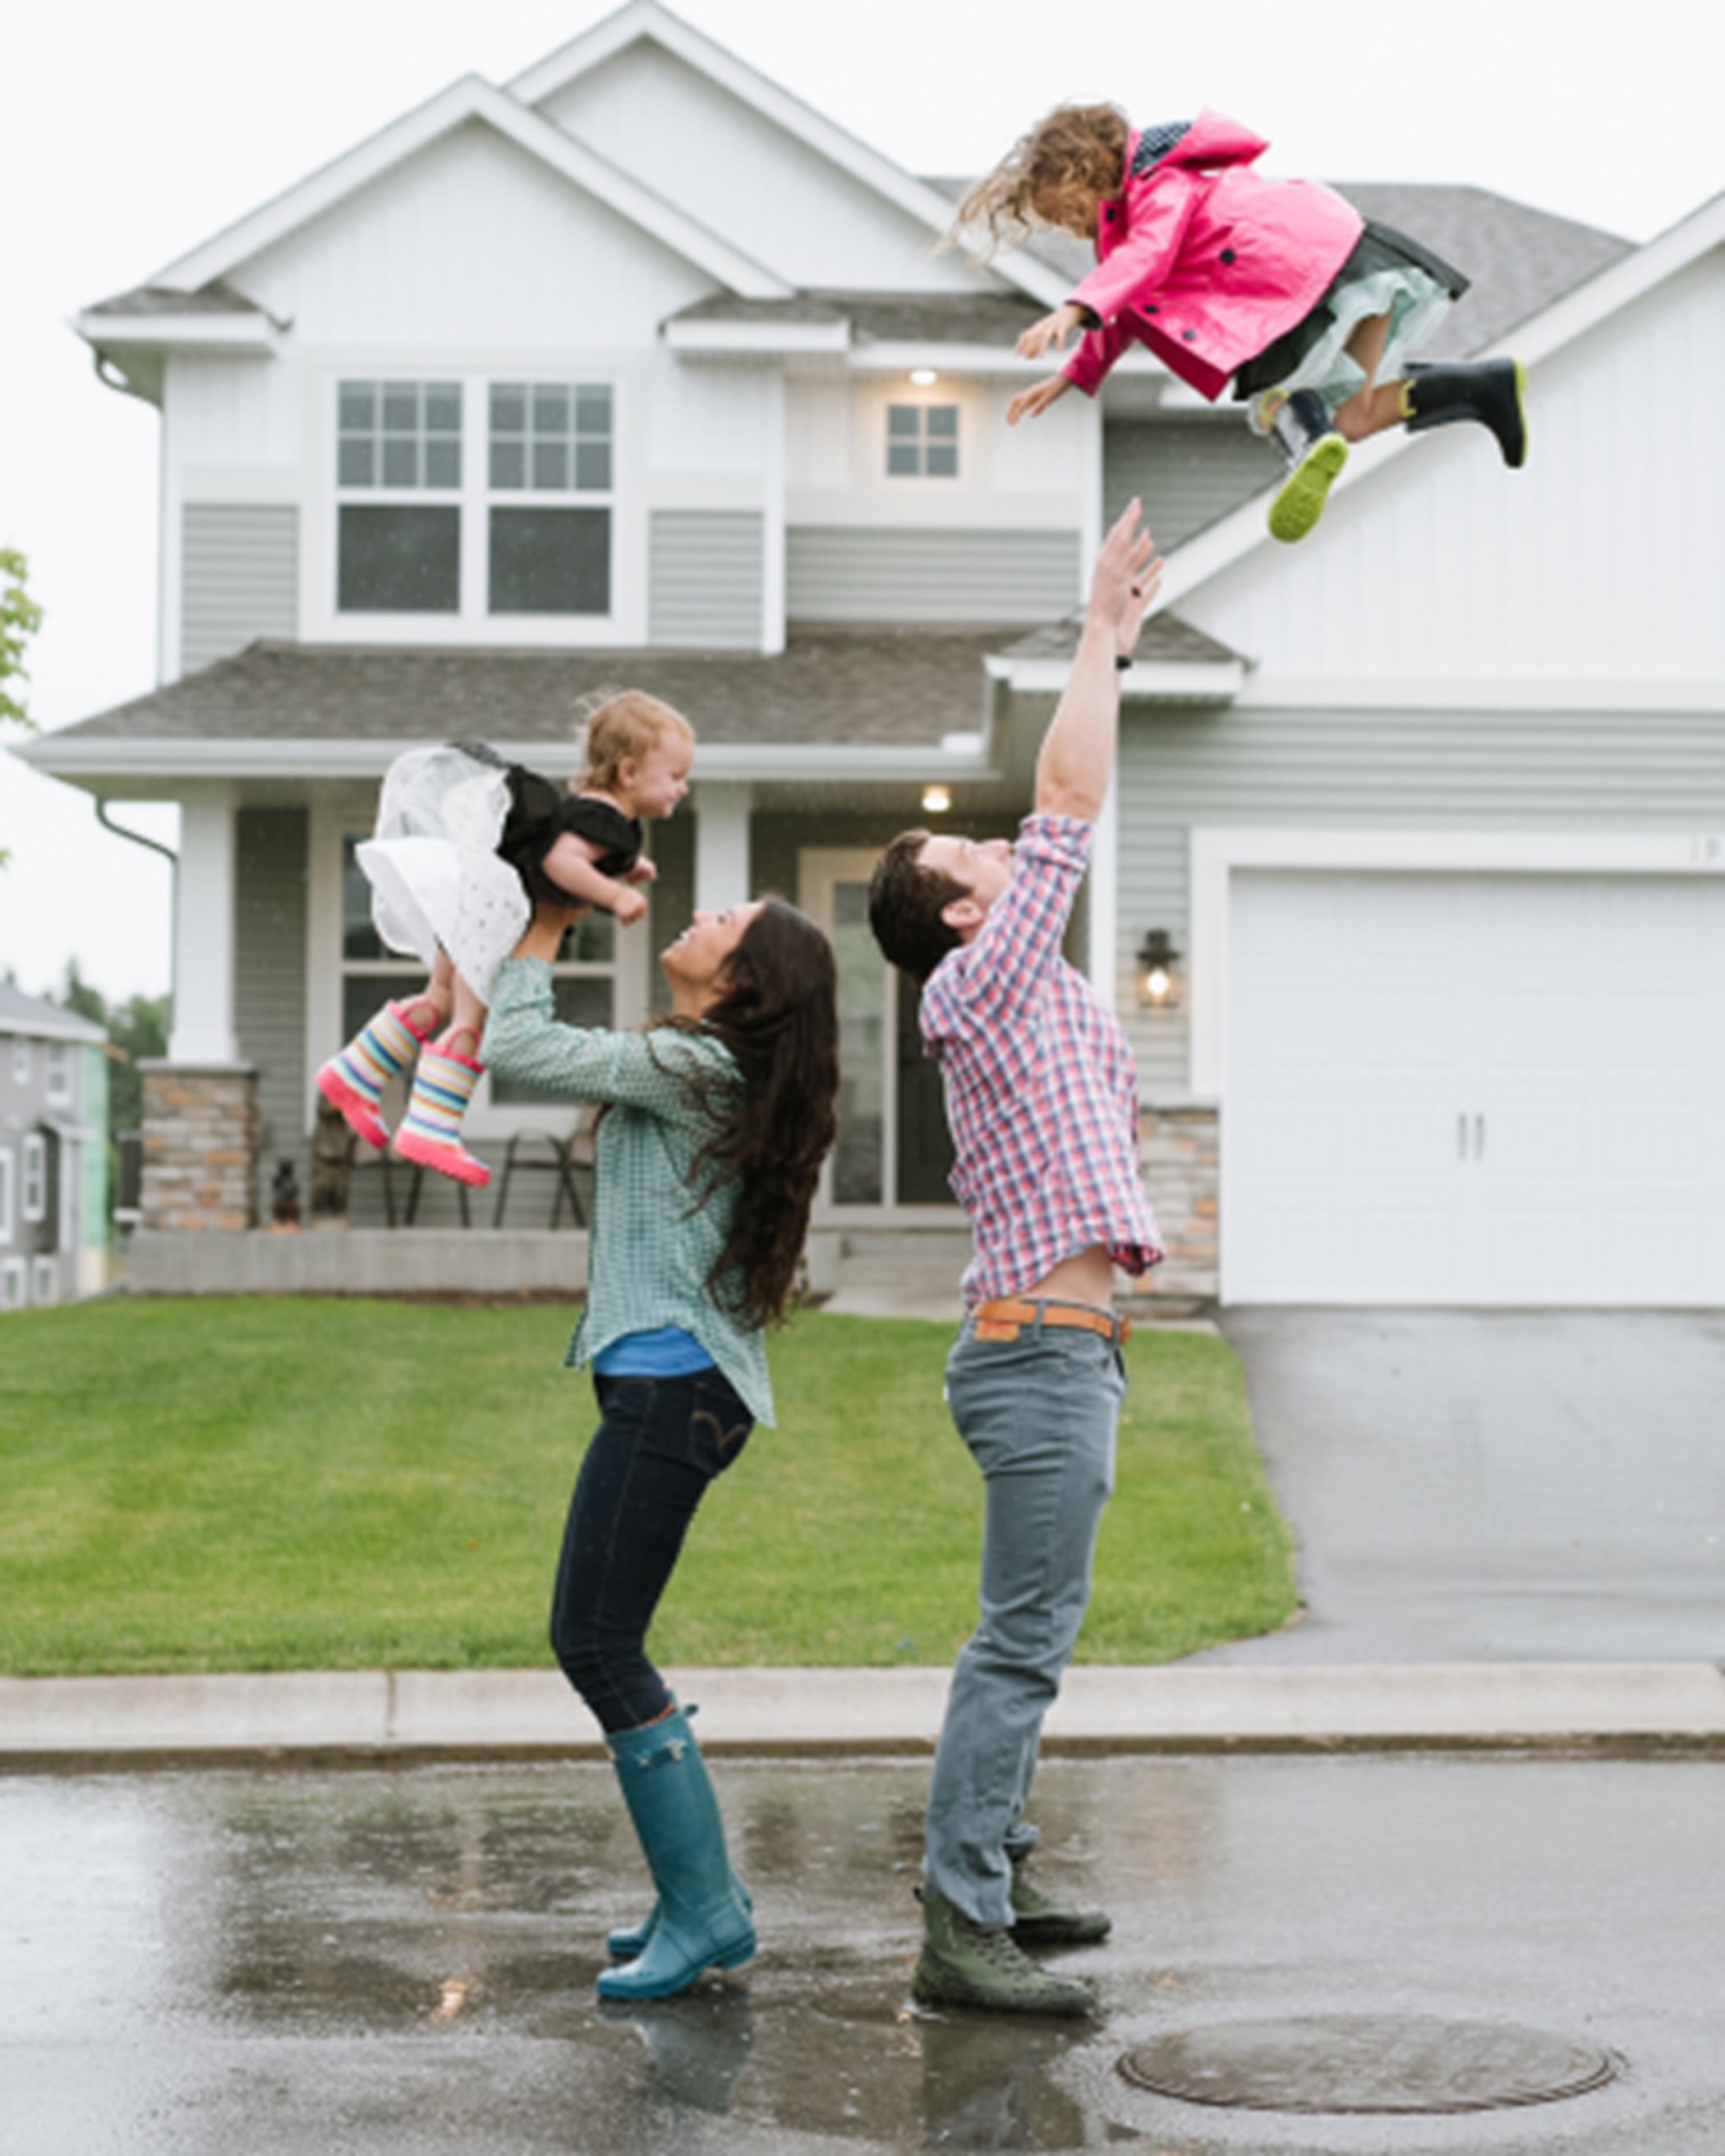 A family playing in the rain